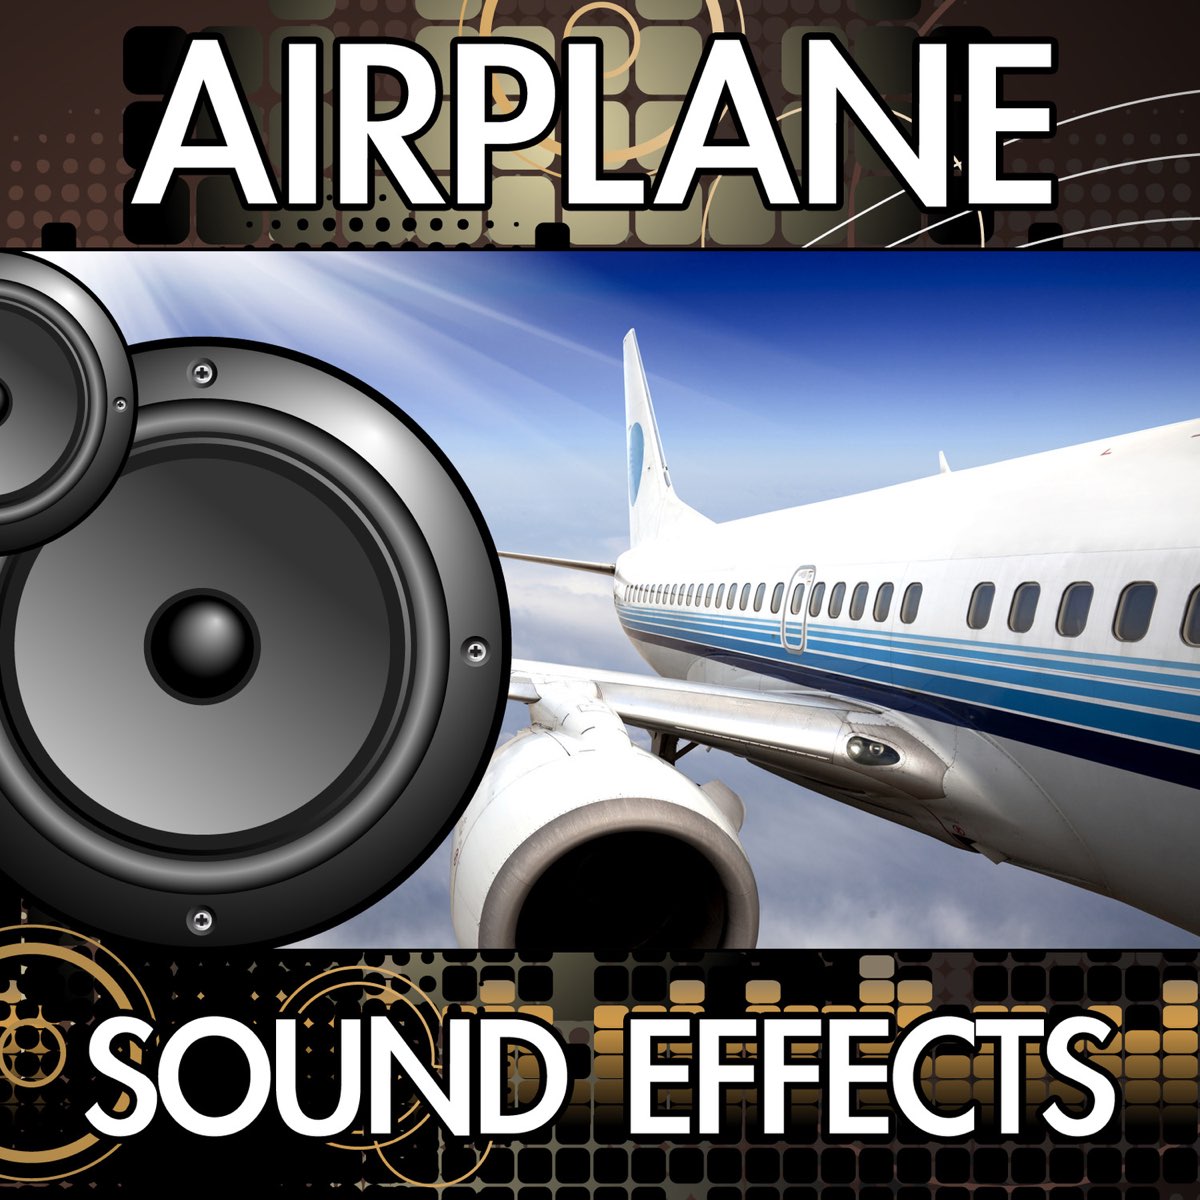 Airplane Sound Effects by Finnolia Sound Effects on Apple Music